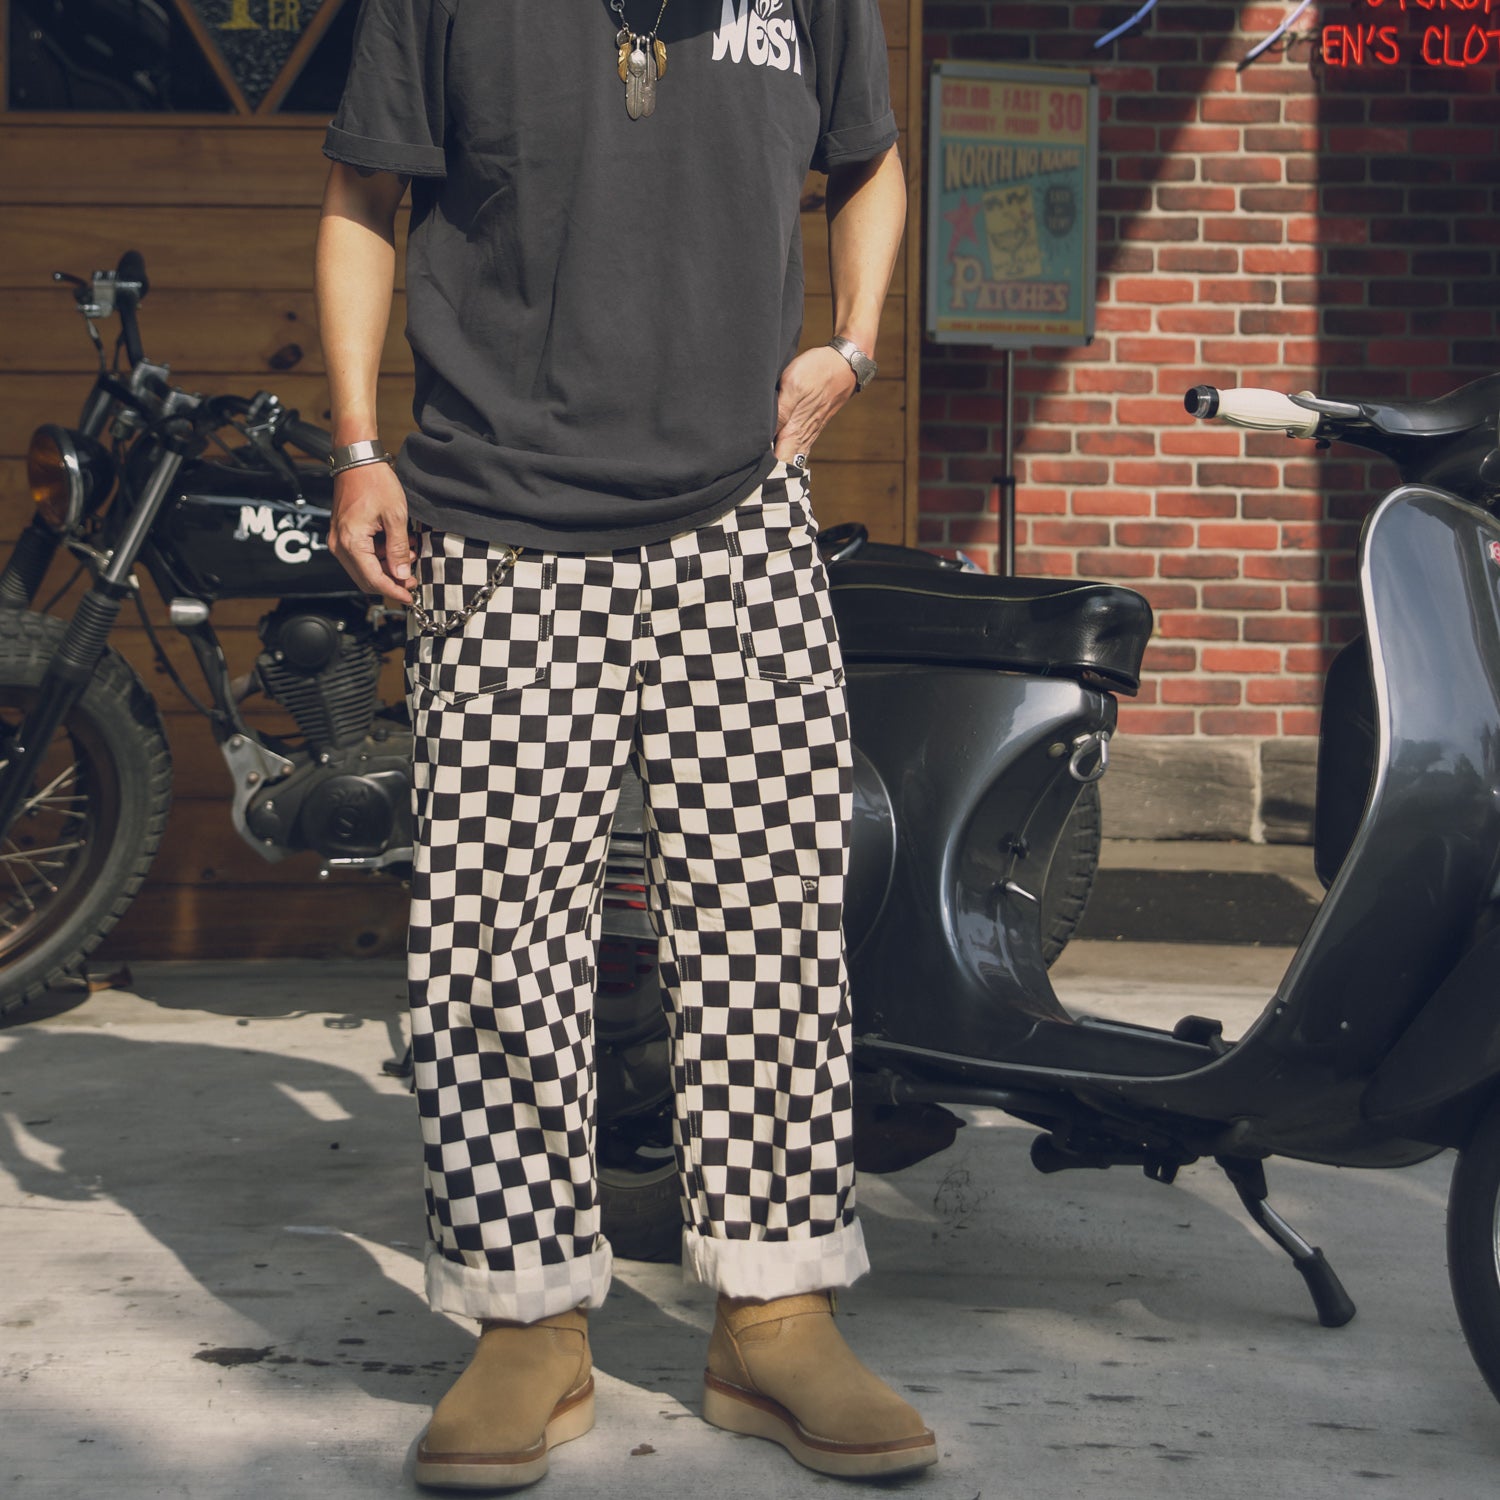 ARMY WORK TROUSERS - CHECKER - May club